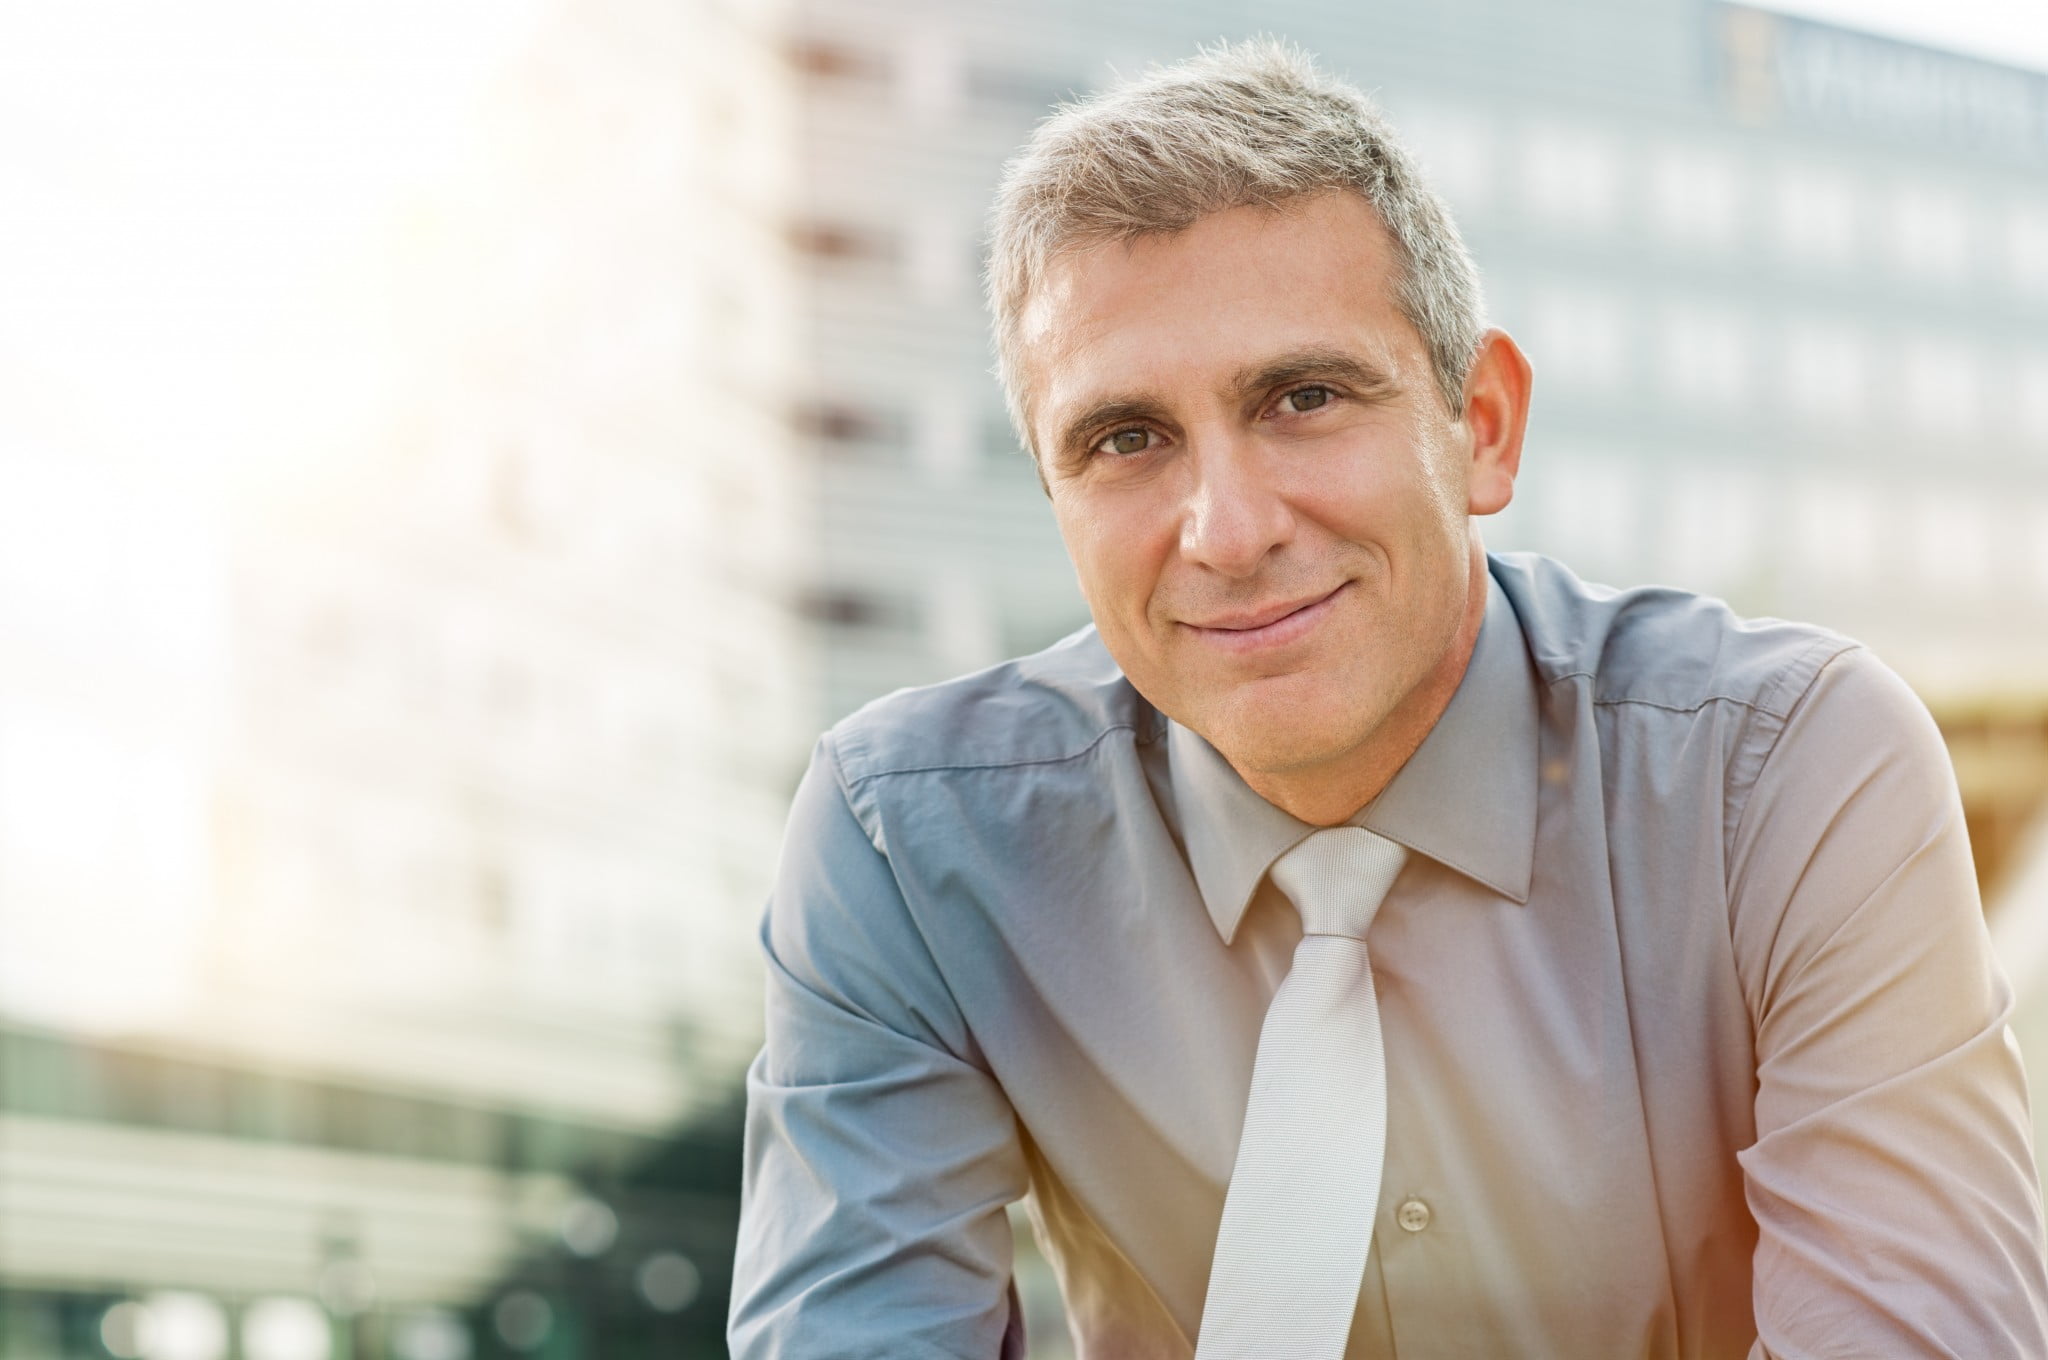 prostate cancer: mature man looking vaguely pleased